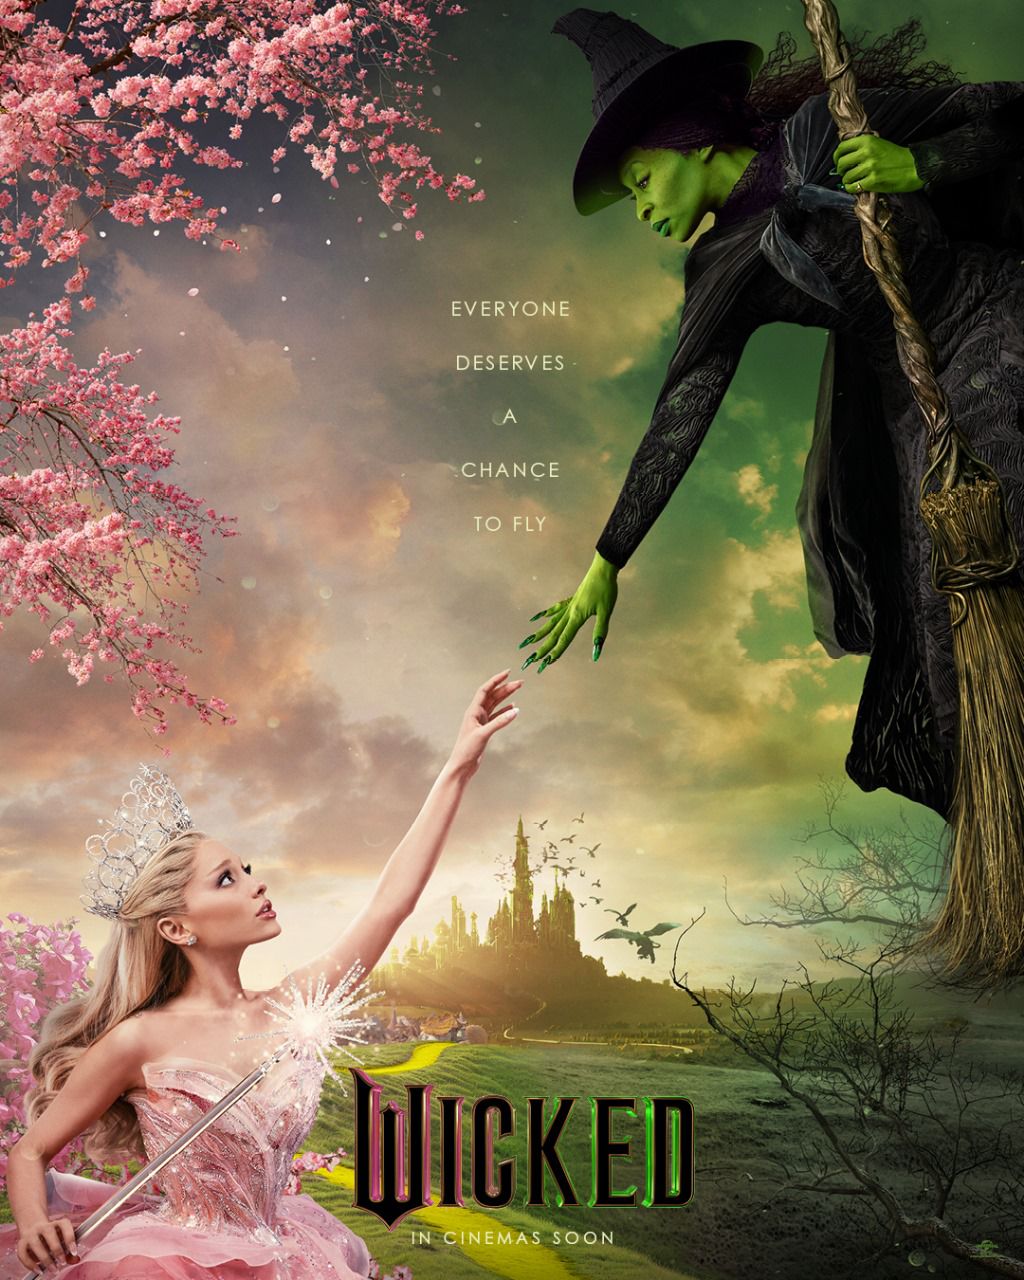 WATCH: The Official Trailer of “WICKED” Starring Ariana Grande and Cynthia Erivo